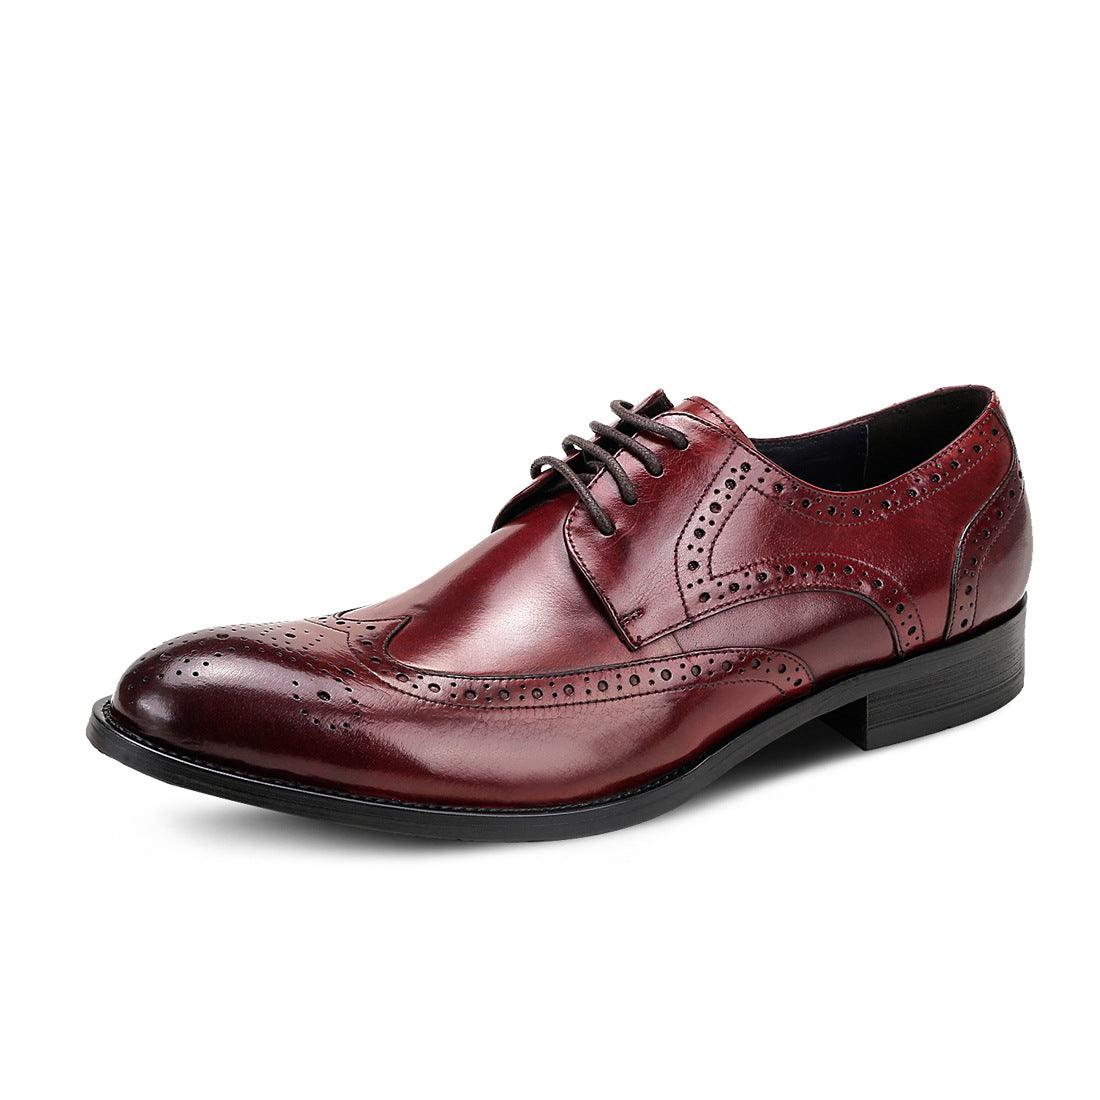 Brogues leather shoes